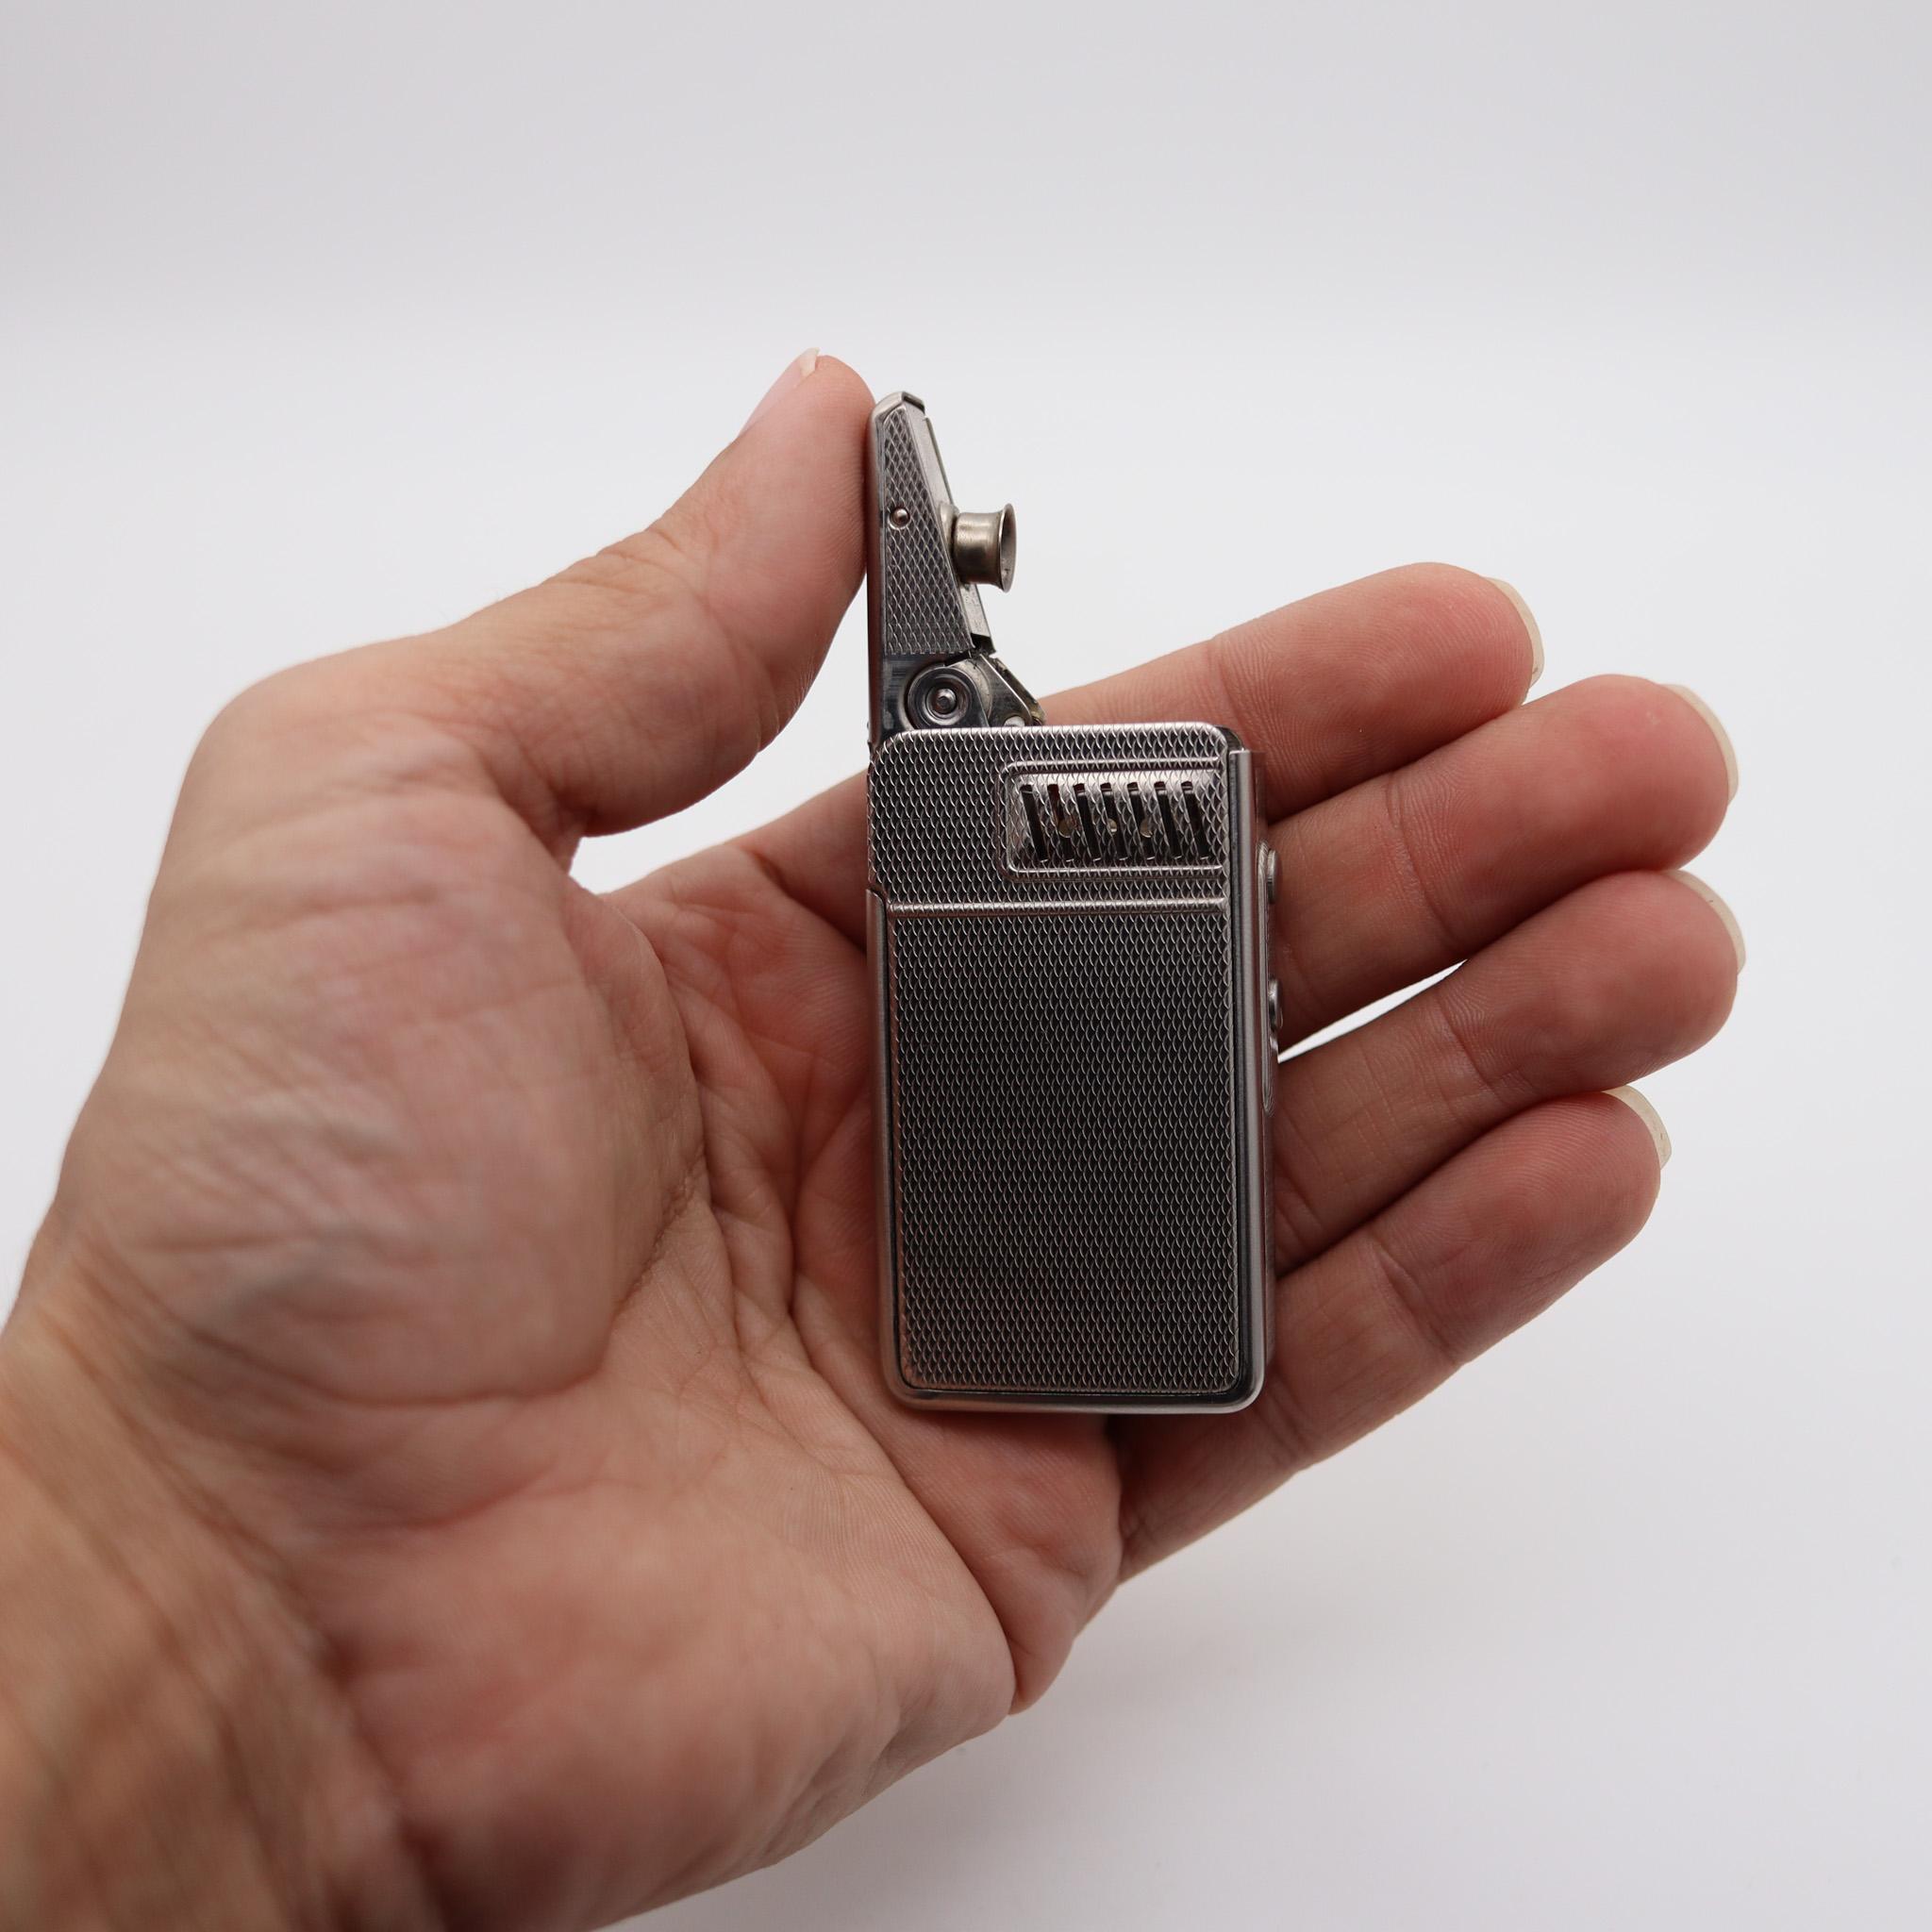 Primex 6300 lighter designed by IMCO.

This is a brilliantly engineered, unusual and quite ingenious semi-automatic pocket lighter designed by Julius Franz Meister in Austria, back in the 1953. This model was made by the IMCO company and was named